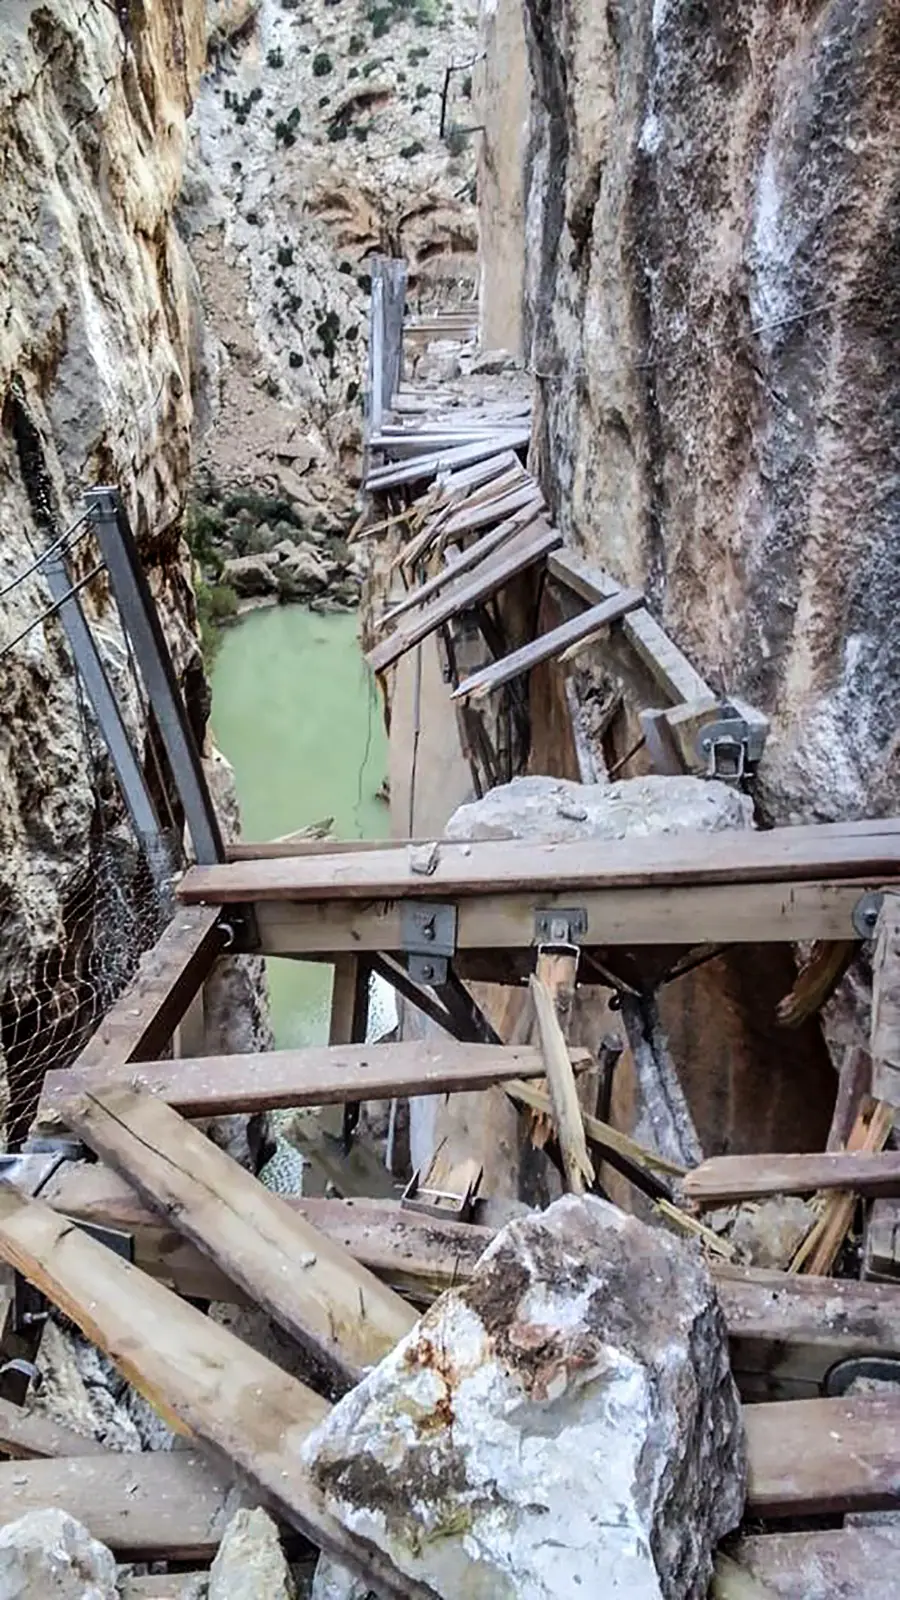 The viral image of the structure damaged by falling stones on the Caminito del Rey, the authorship is unknown/